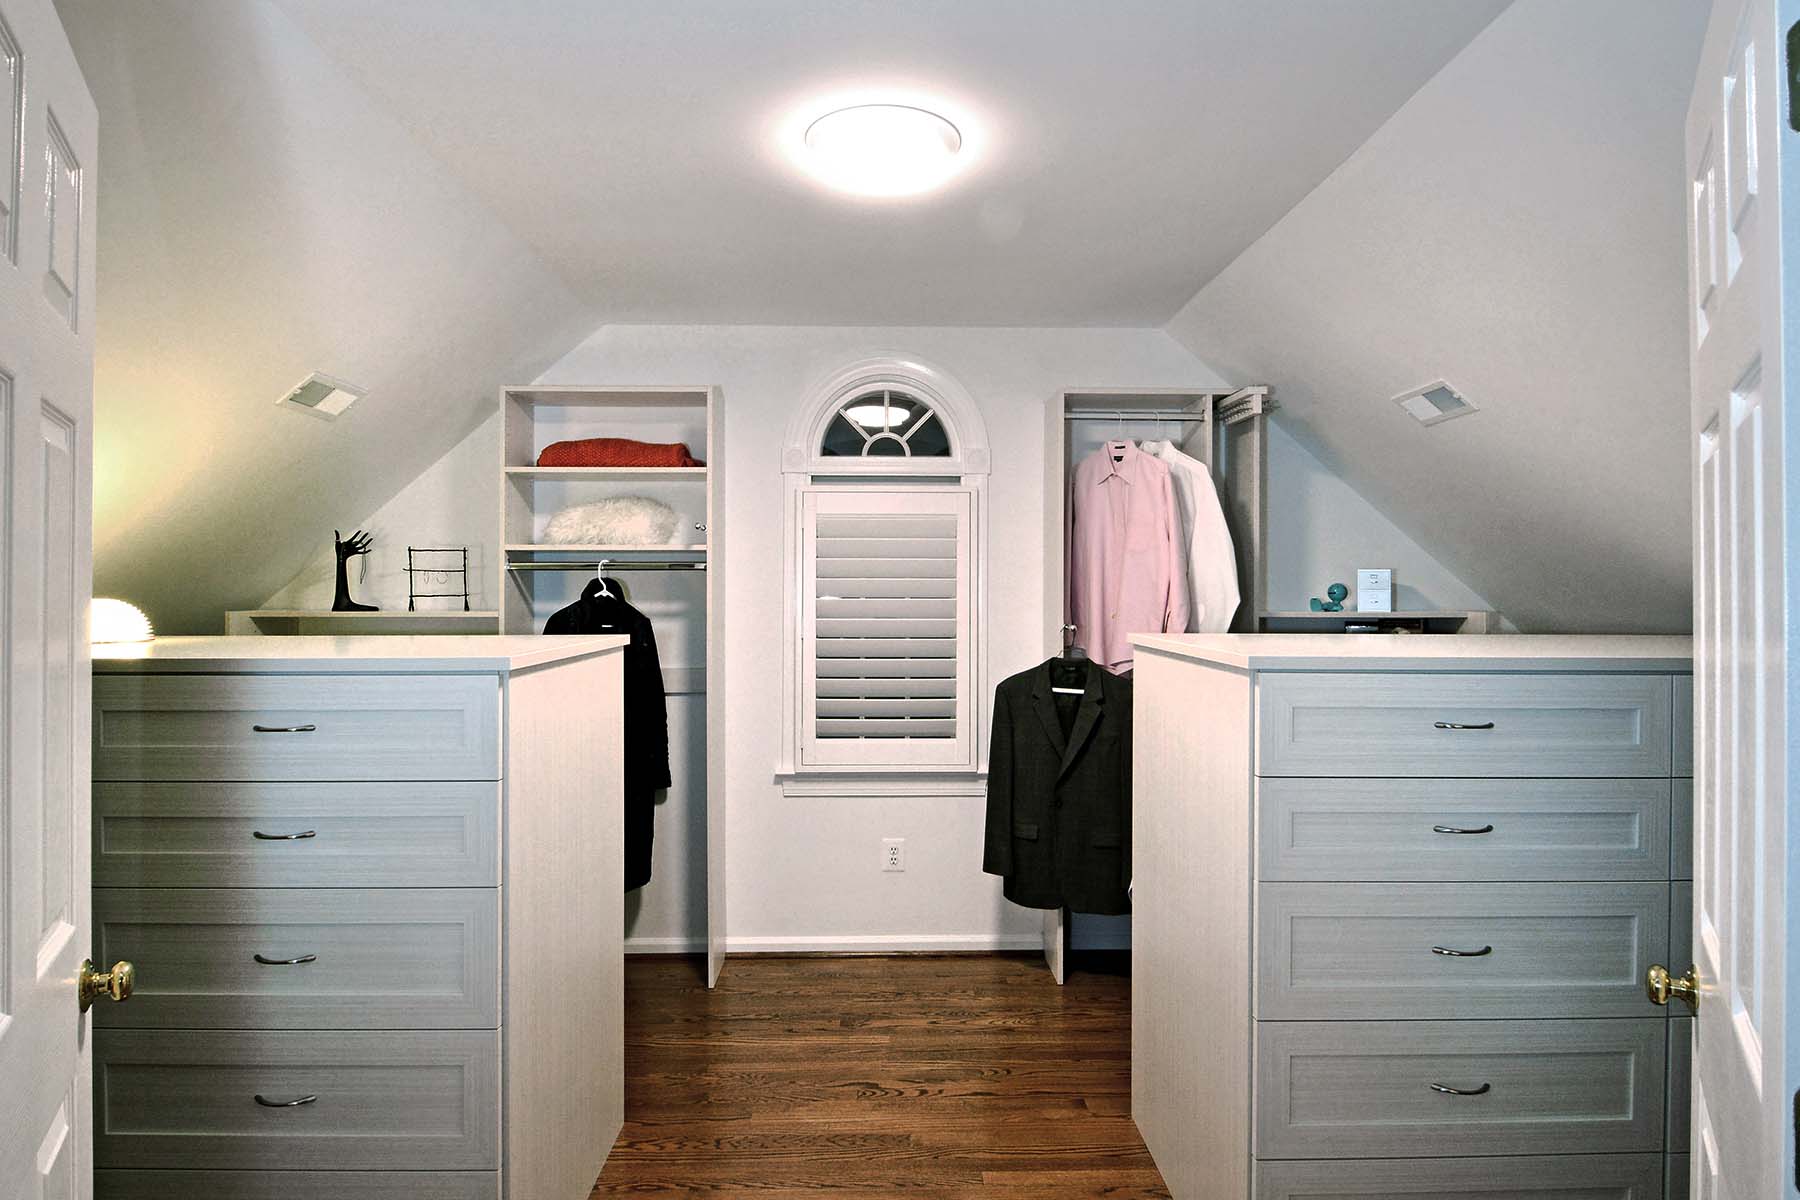 Walk in closet with slanted ceiling